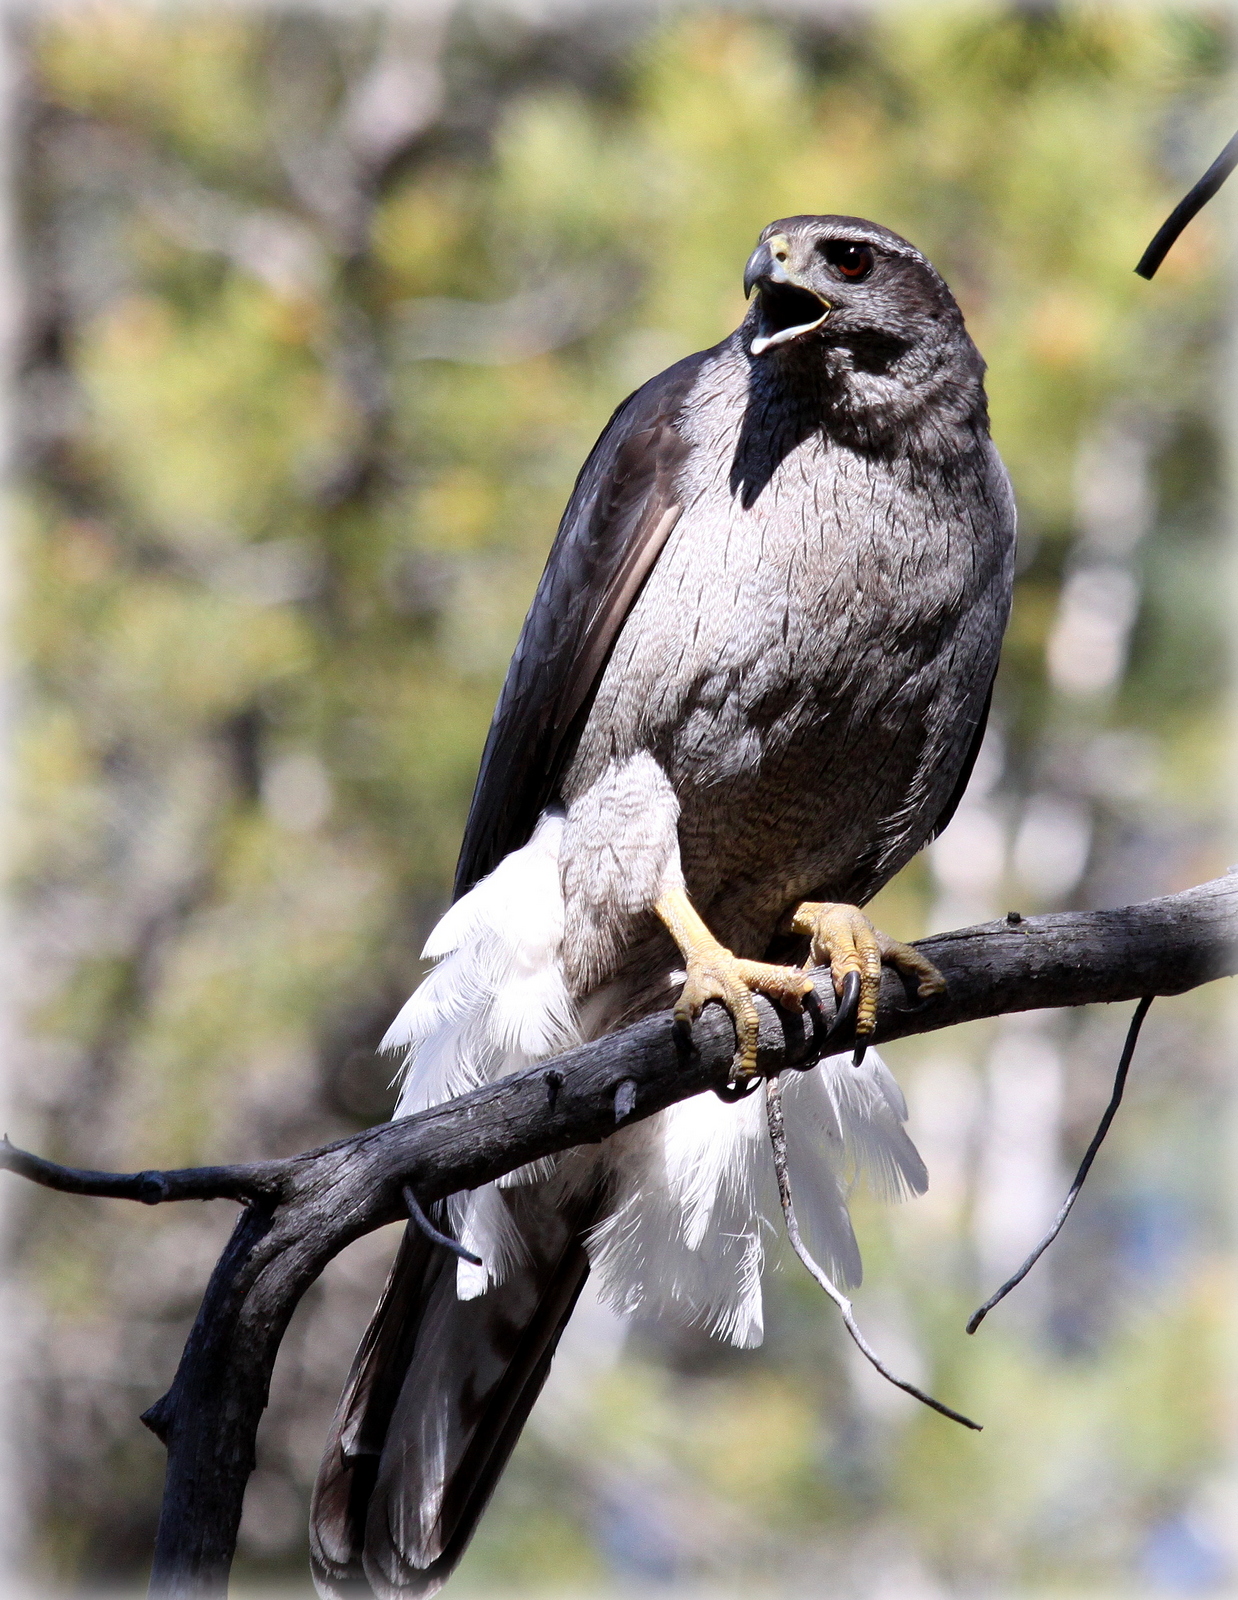 a very large adult female goshawk perched on a branch with a forested background. Her mouth is open, aggressively calling